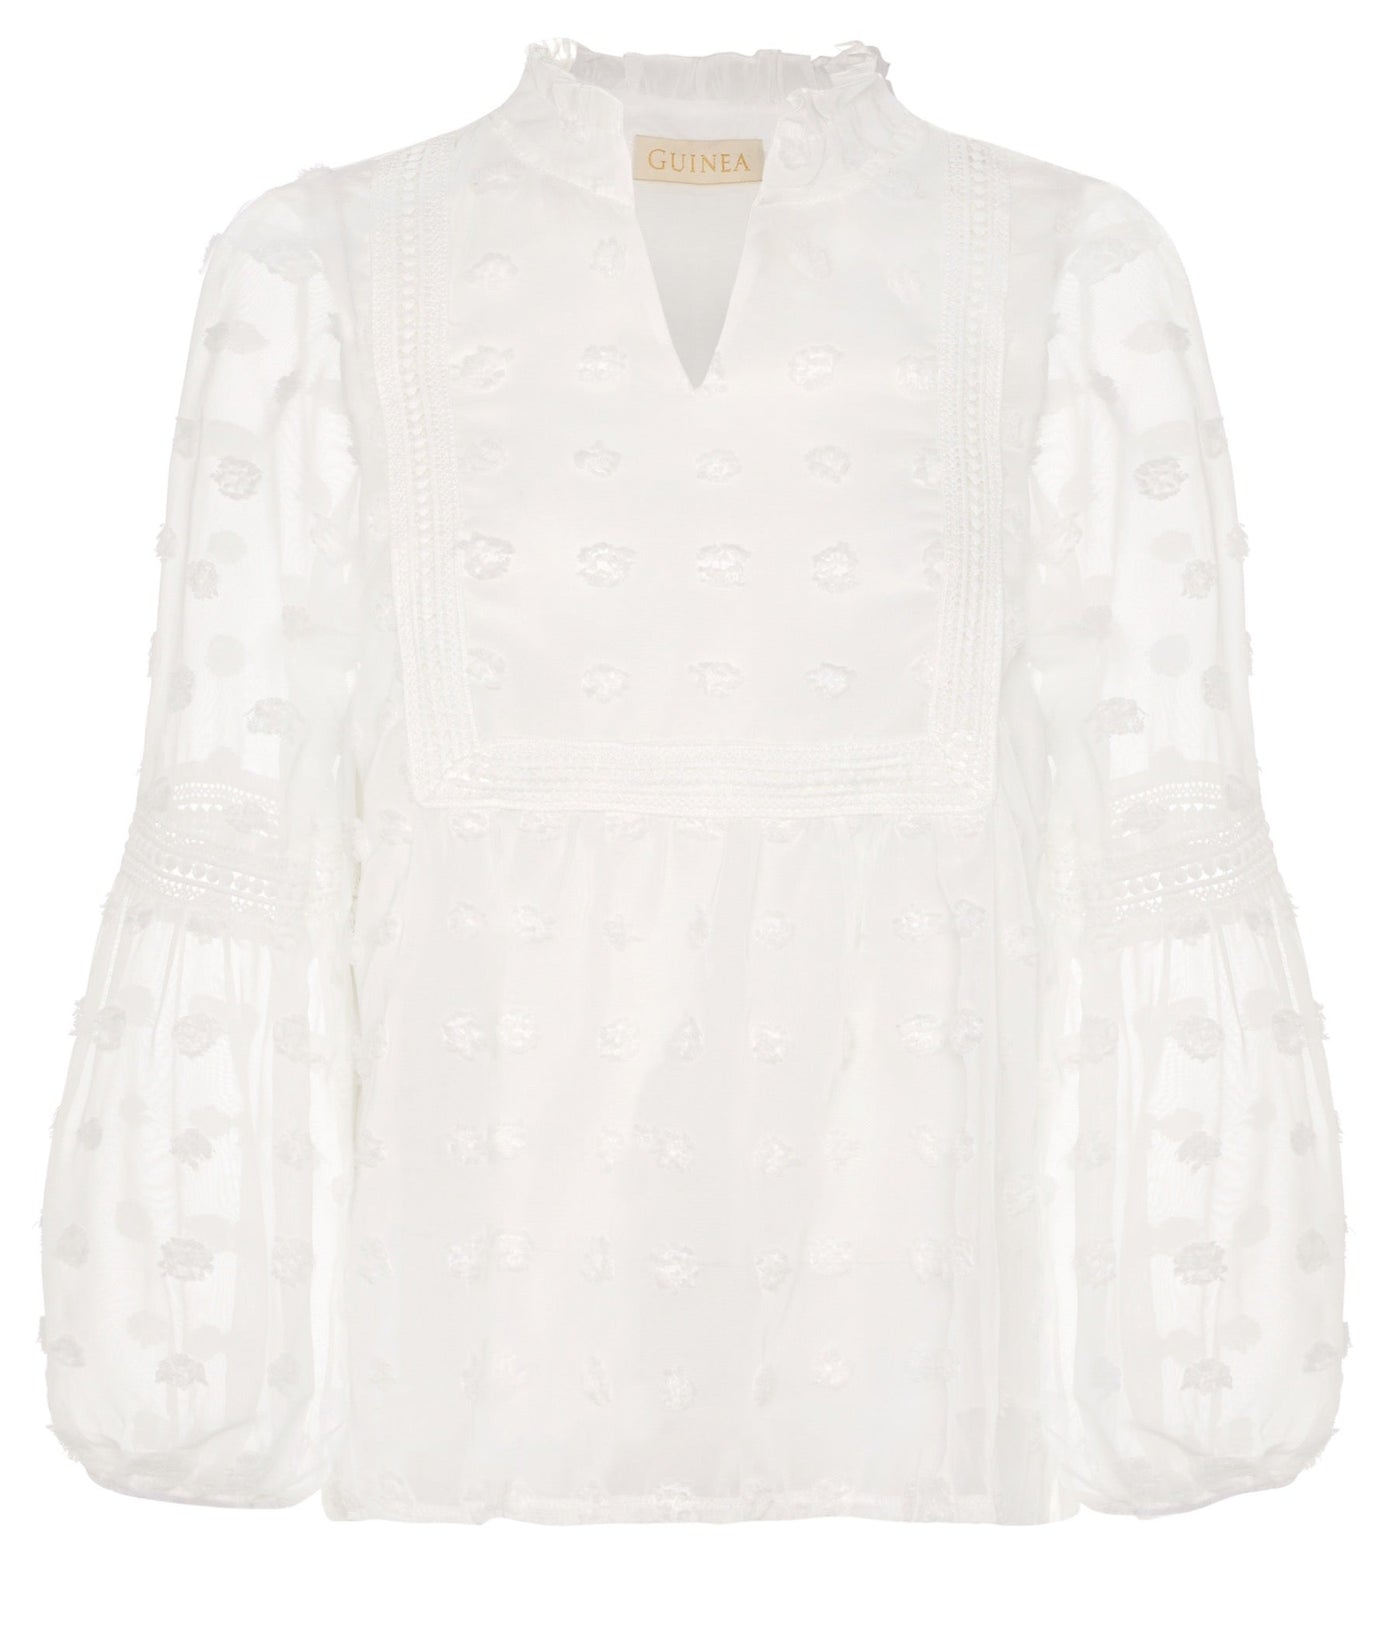 Mia - Long Sleeved Summer Top - White - 50% OFF